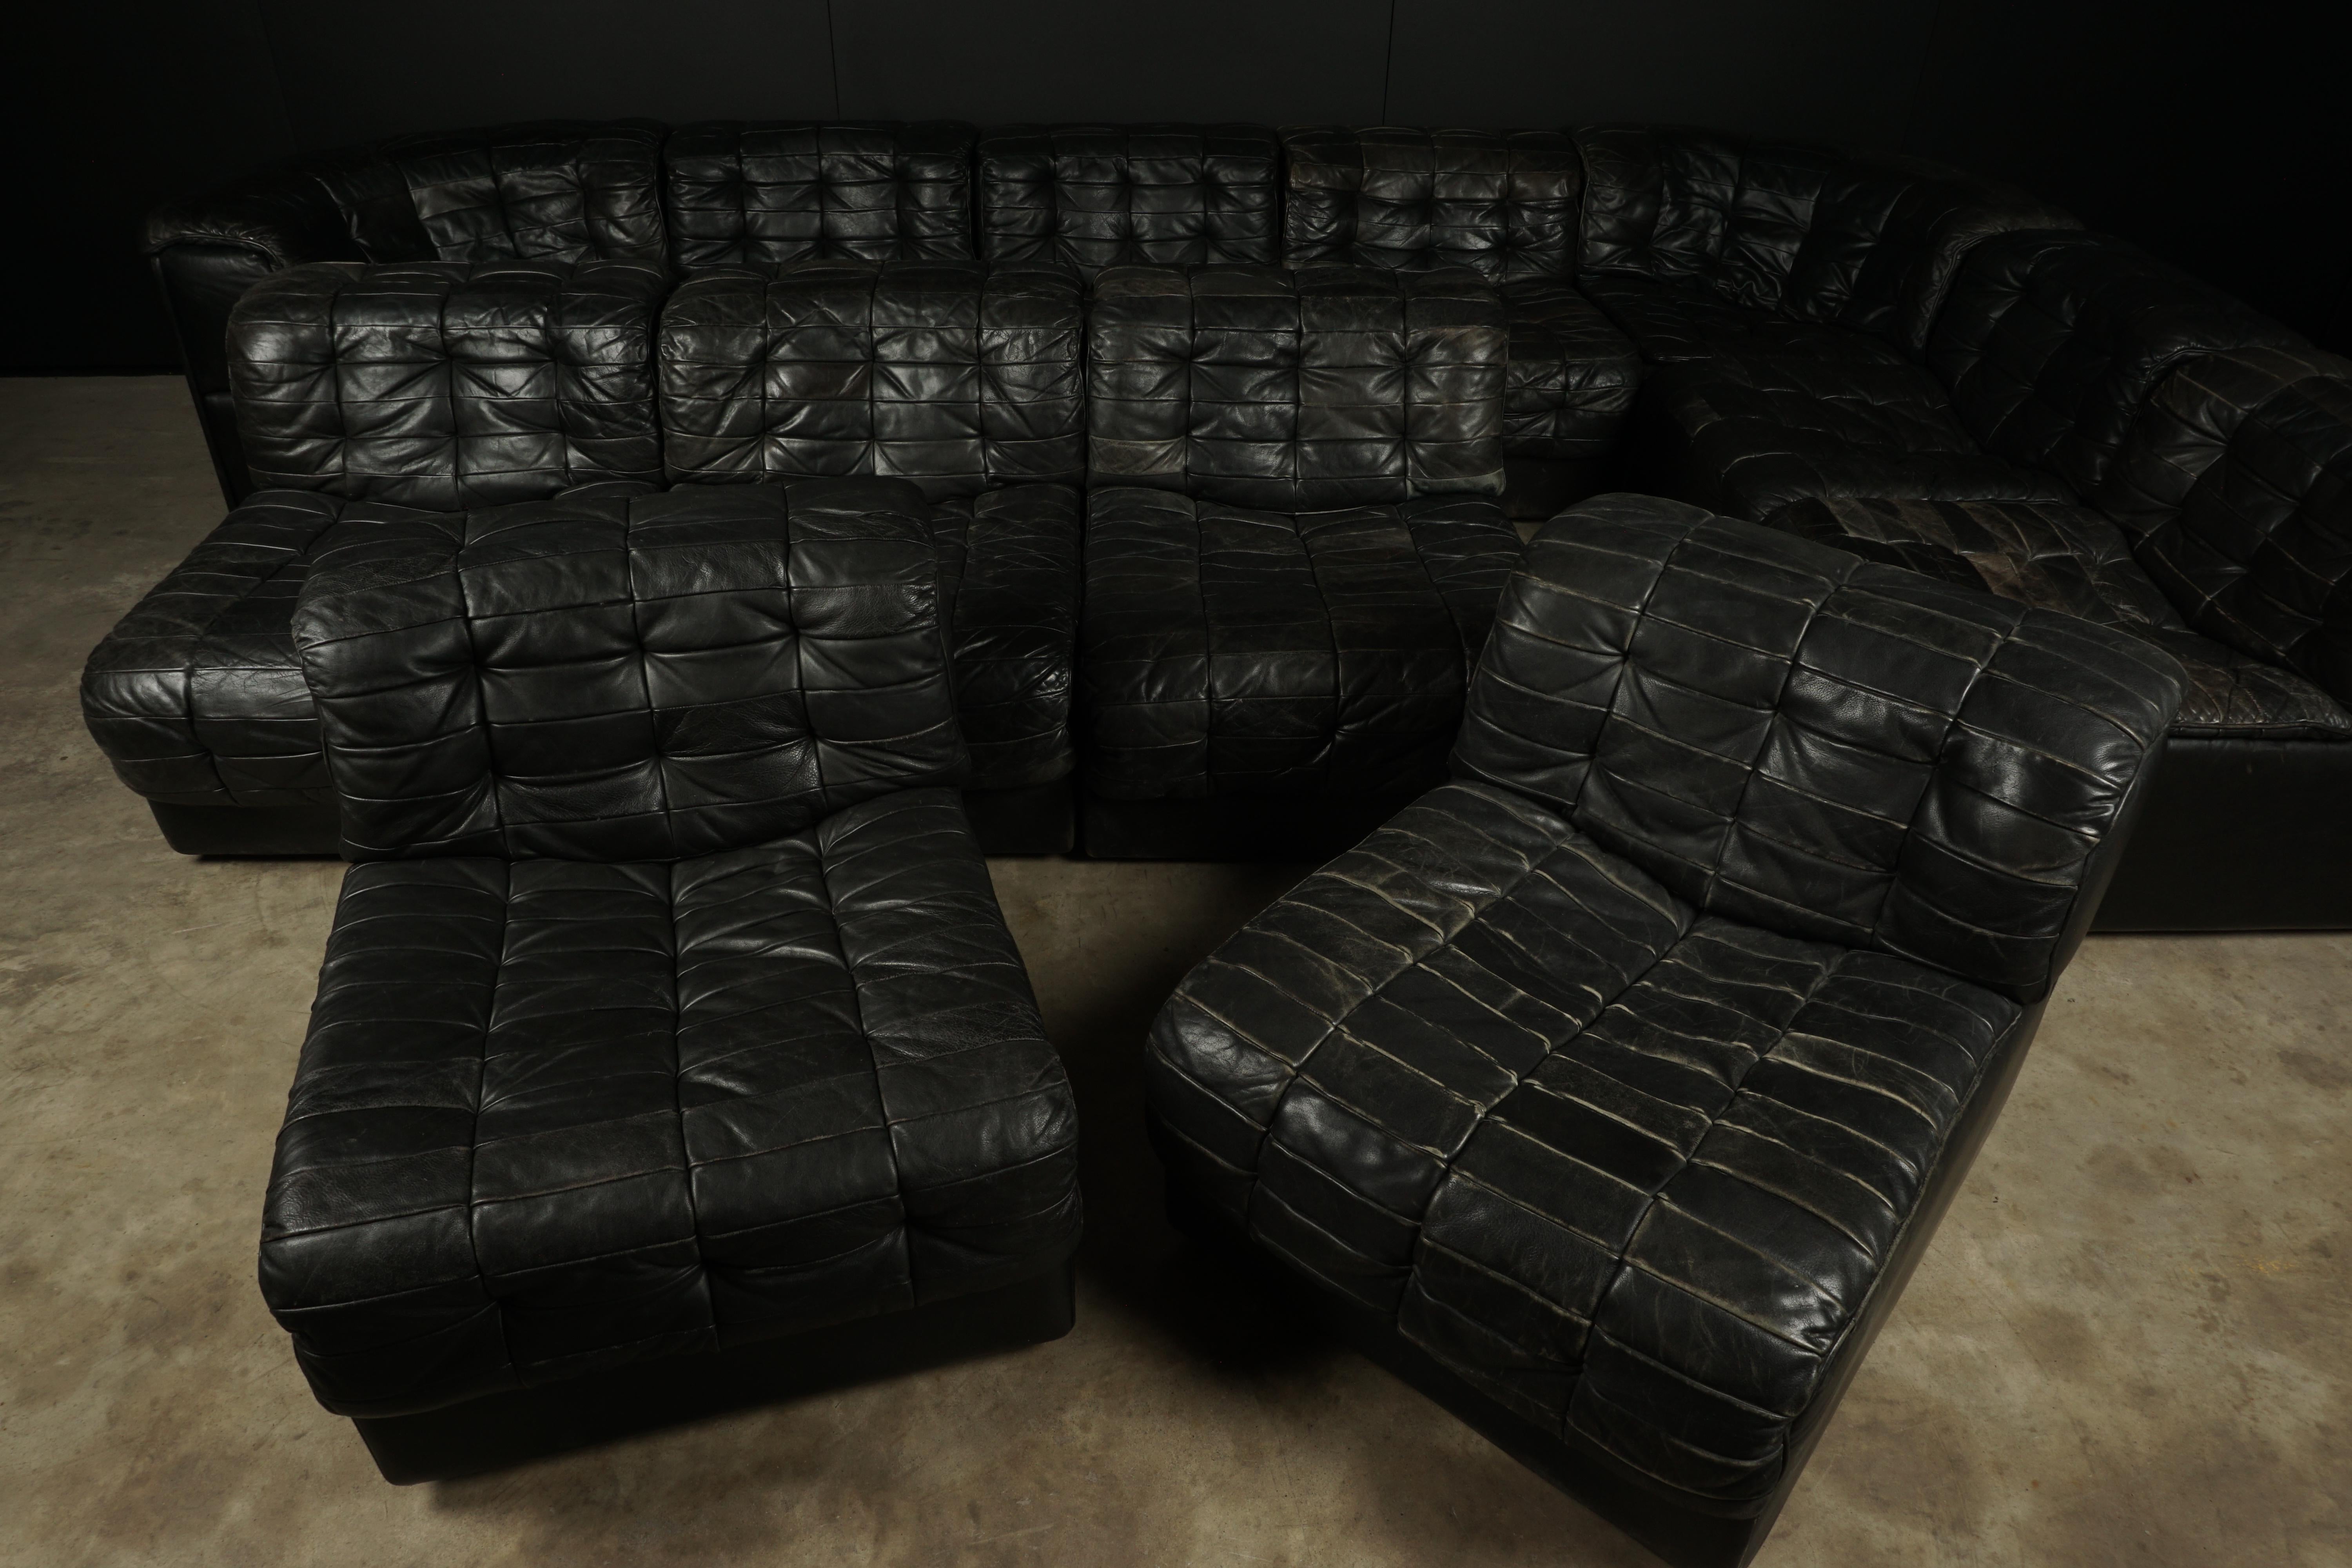 Rare De Sede DS 11 sectional patchwork sofa in black leather, 1970s. Large model with twelve modular pieces that can be arranged to your wishes. Manufactured by De Sede in Switzerland, with great wear and patina.
Corner element measures: D 35 x W